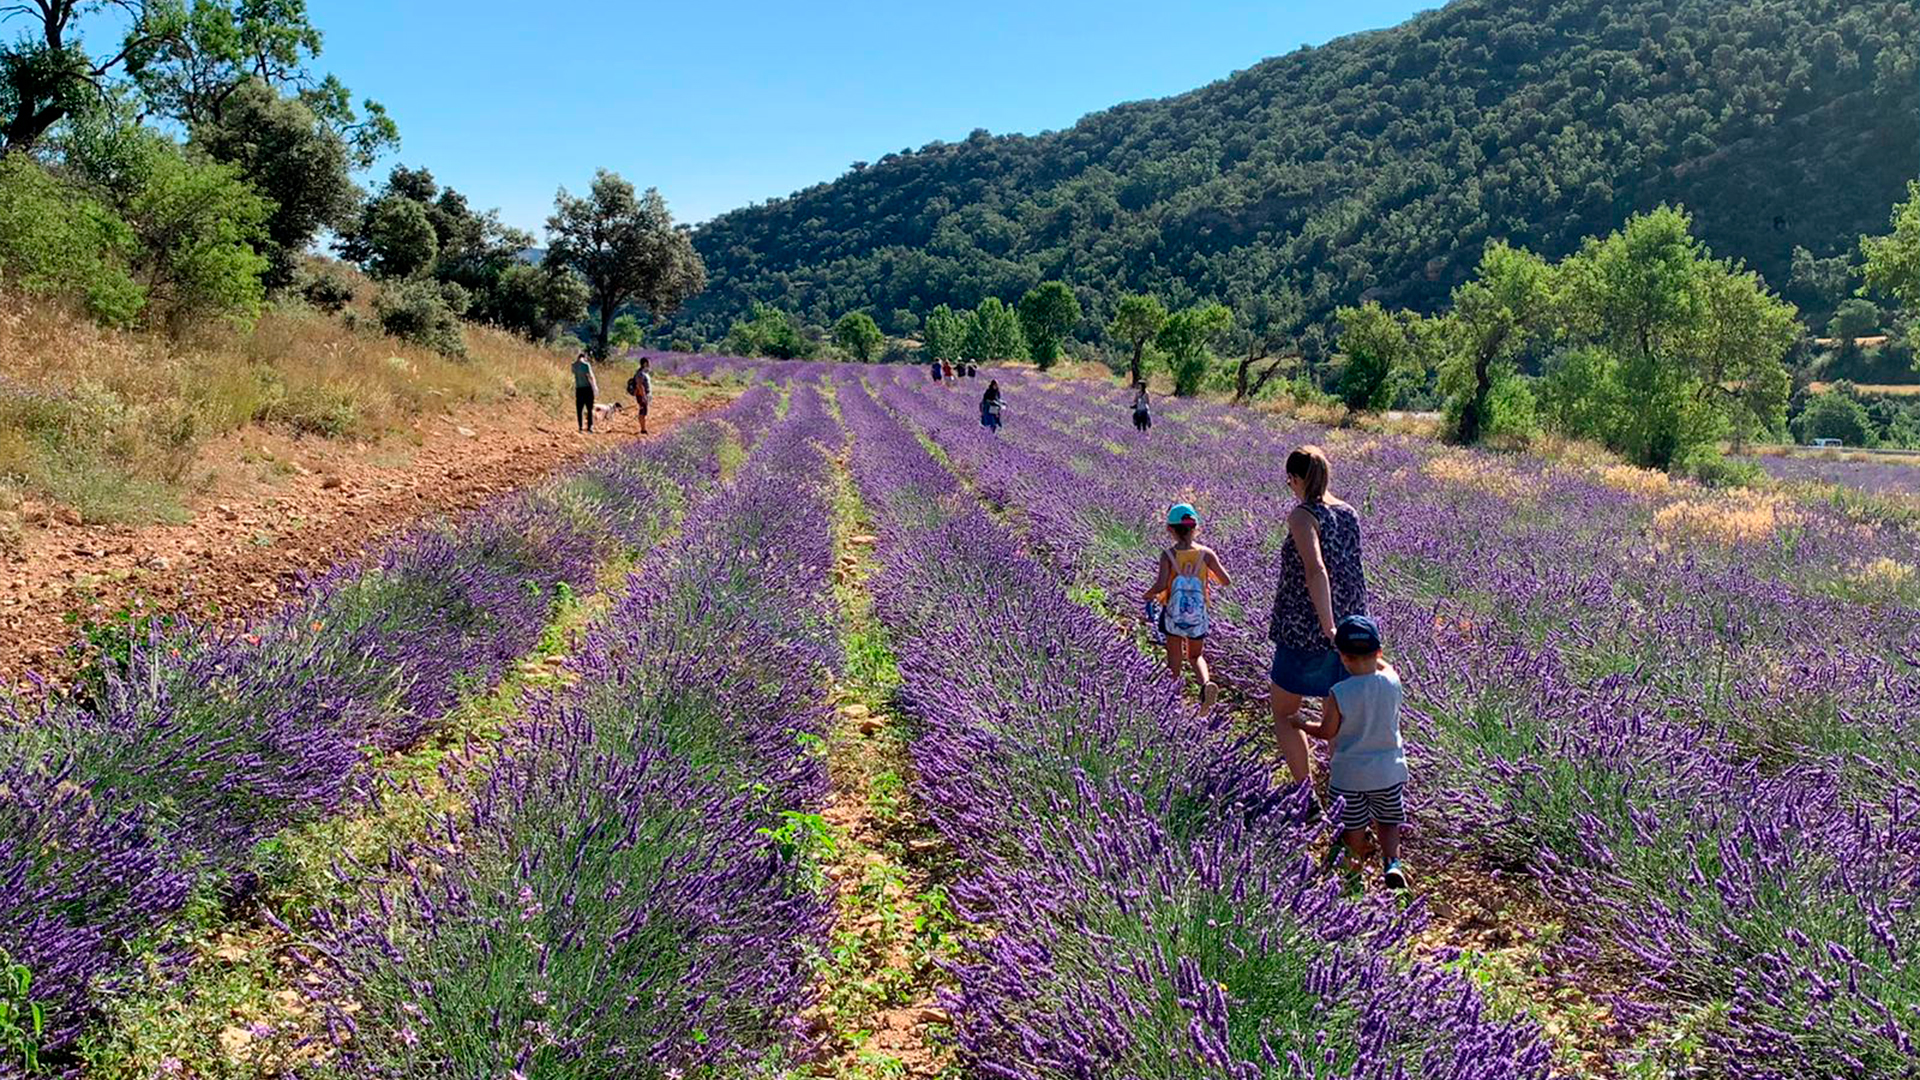 VISITS TO LAVENDER FIELDS